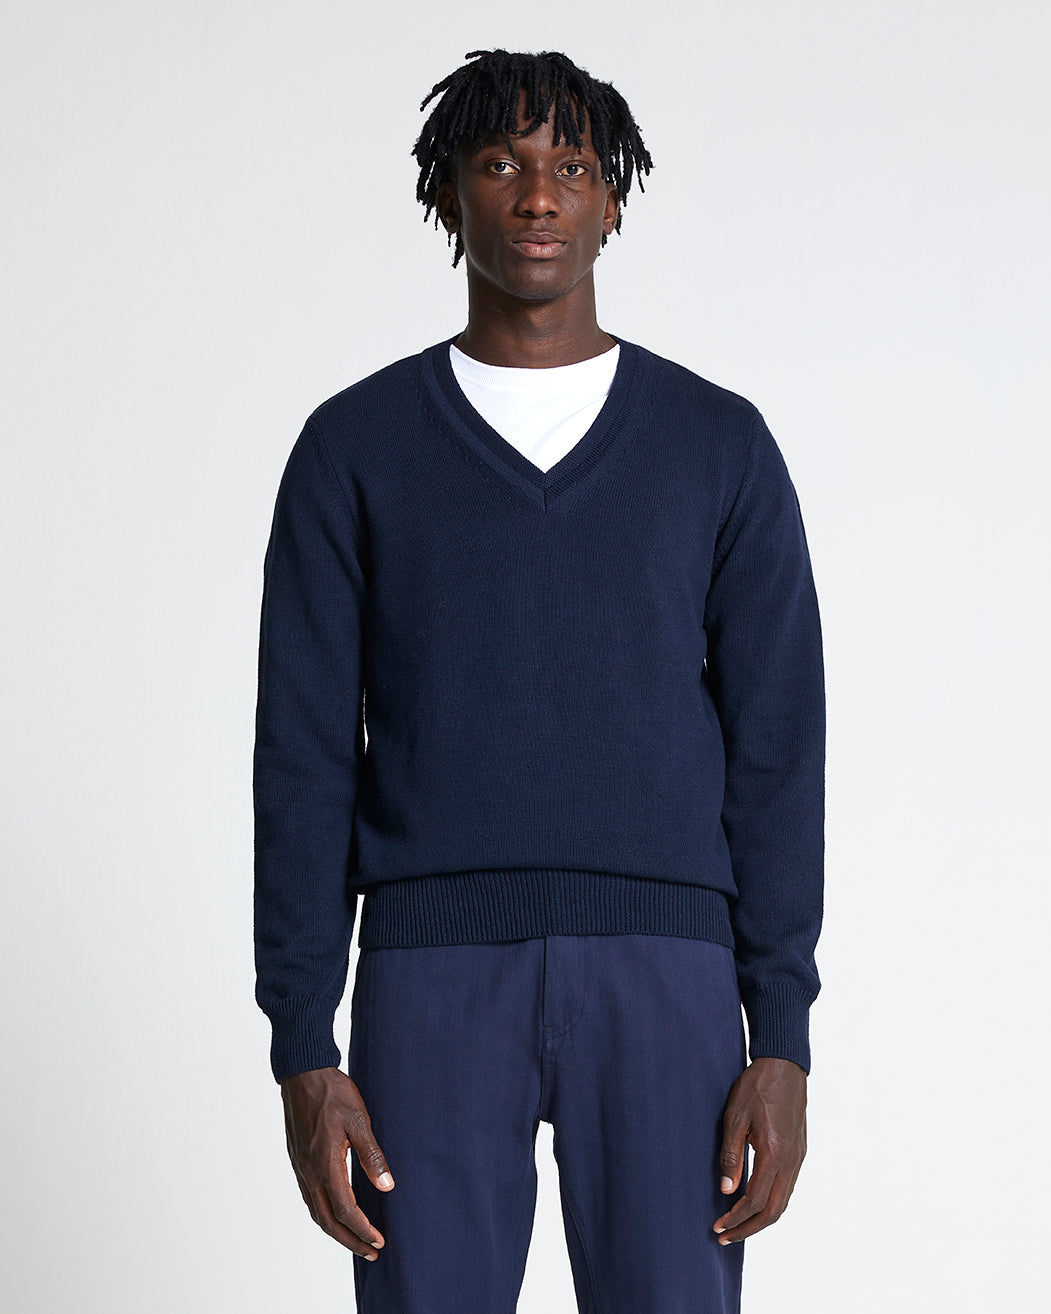 The Cotton V-Neck Sweater in Sky Captain